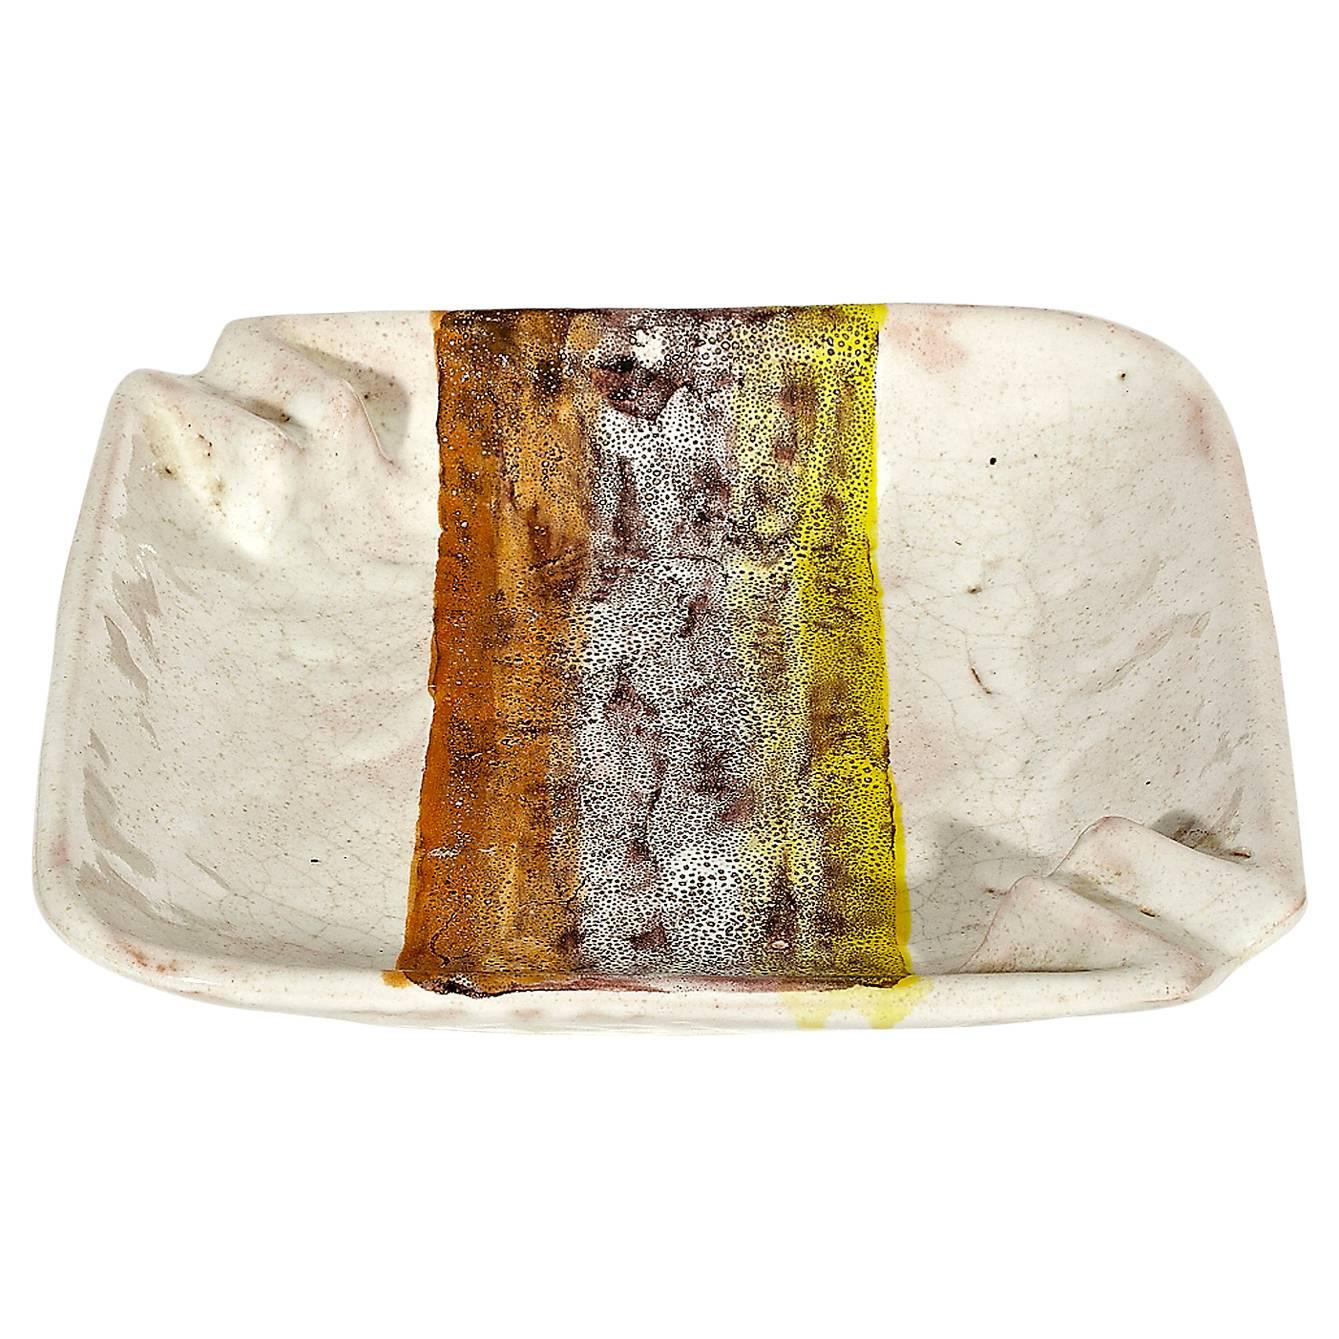 Raymor Italy Ceramic Hand-Painted Ashtray For Sale